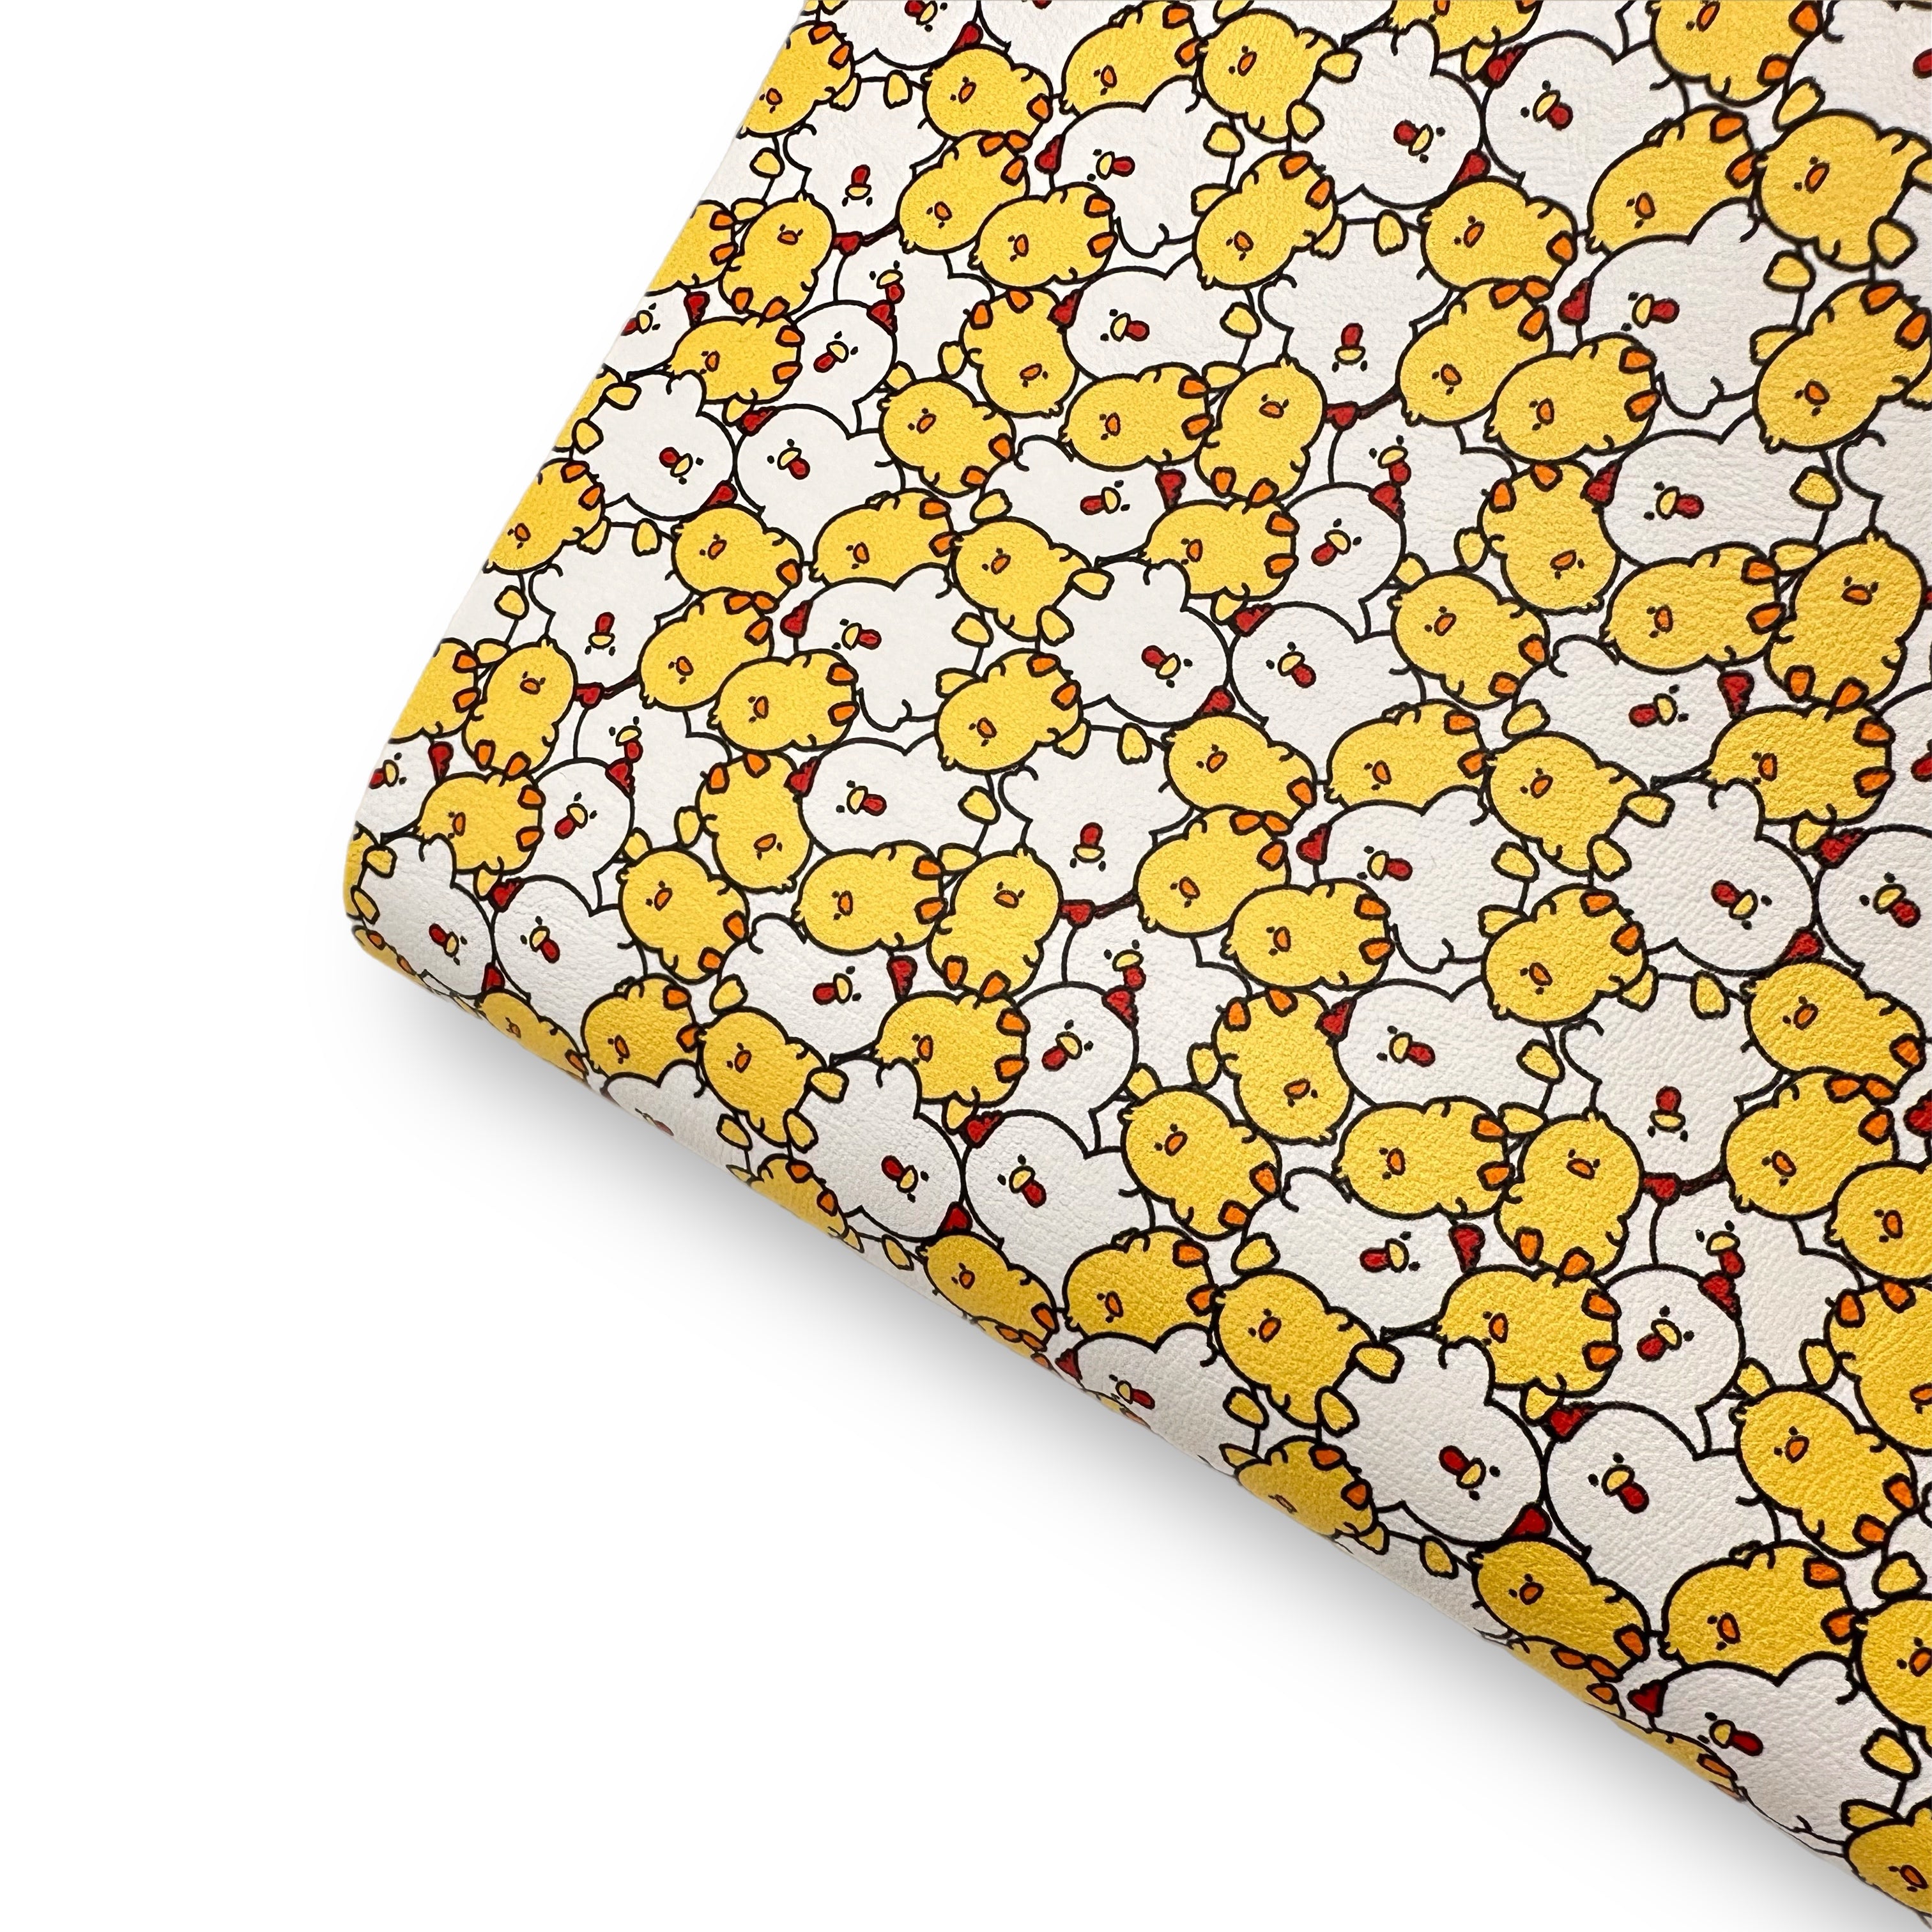 Little Chick Premium Faux Leather Fabric